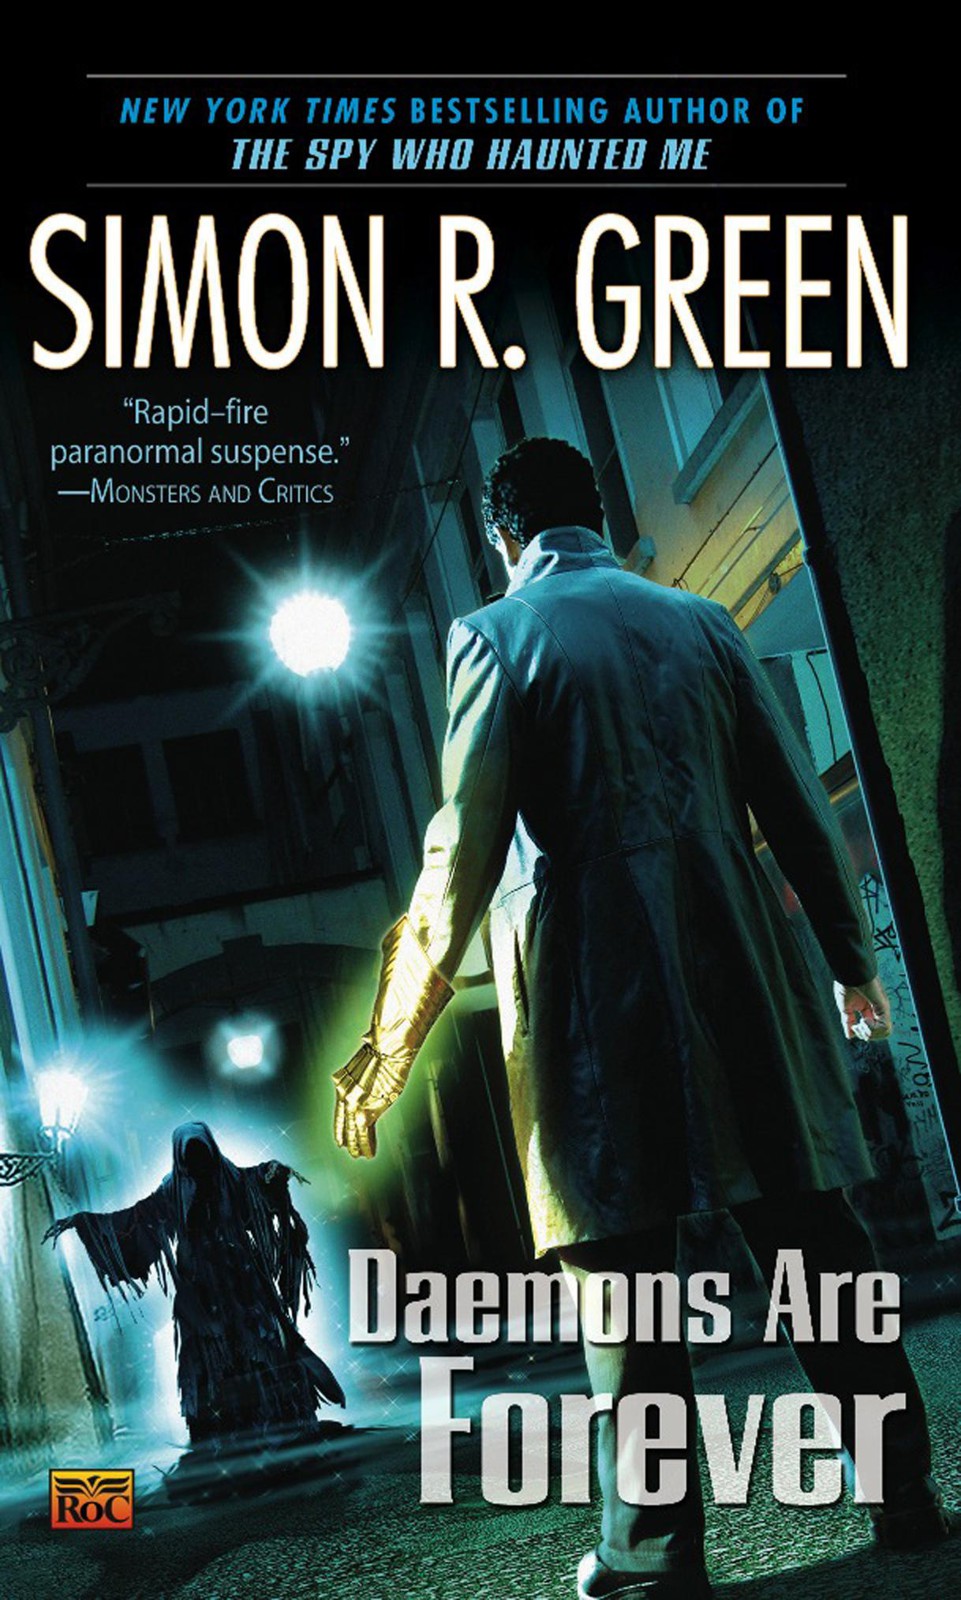 Book 2 - Daemons Are Forever by Simon R. Green